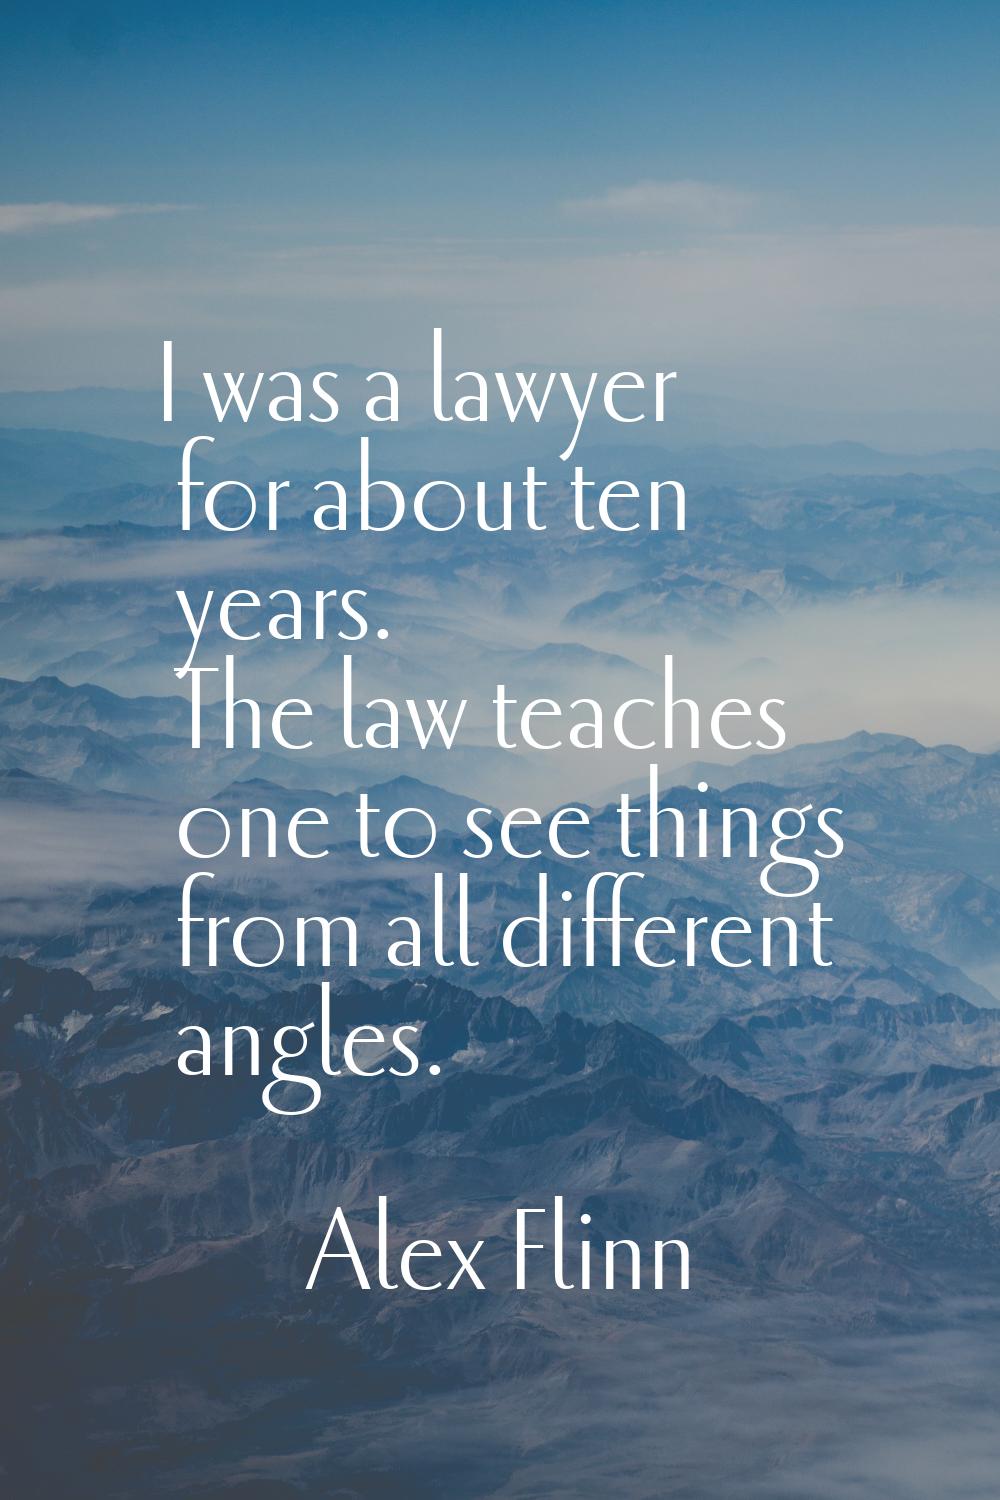 I was a lawyer for about ten years. The law teaches one to see things from all different angles.